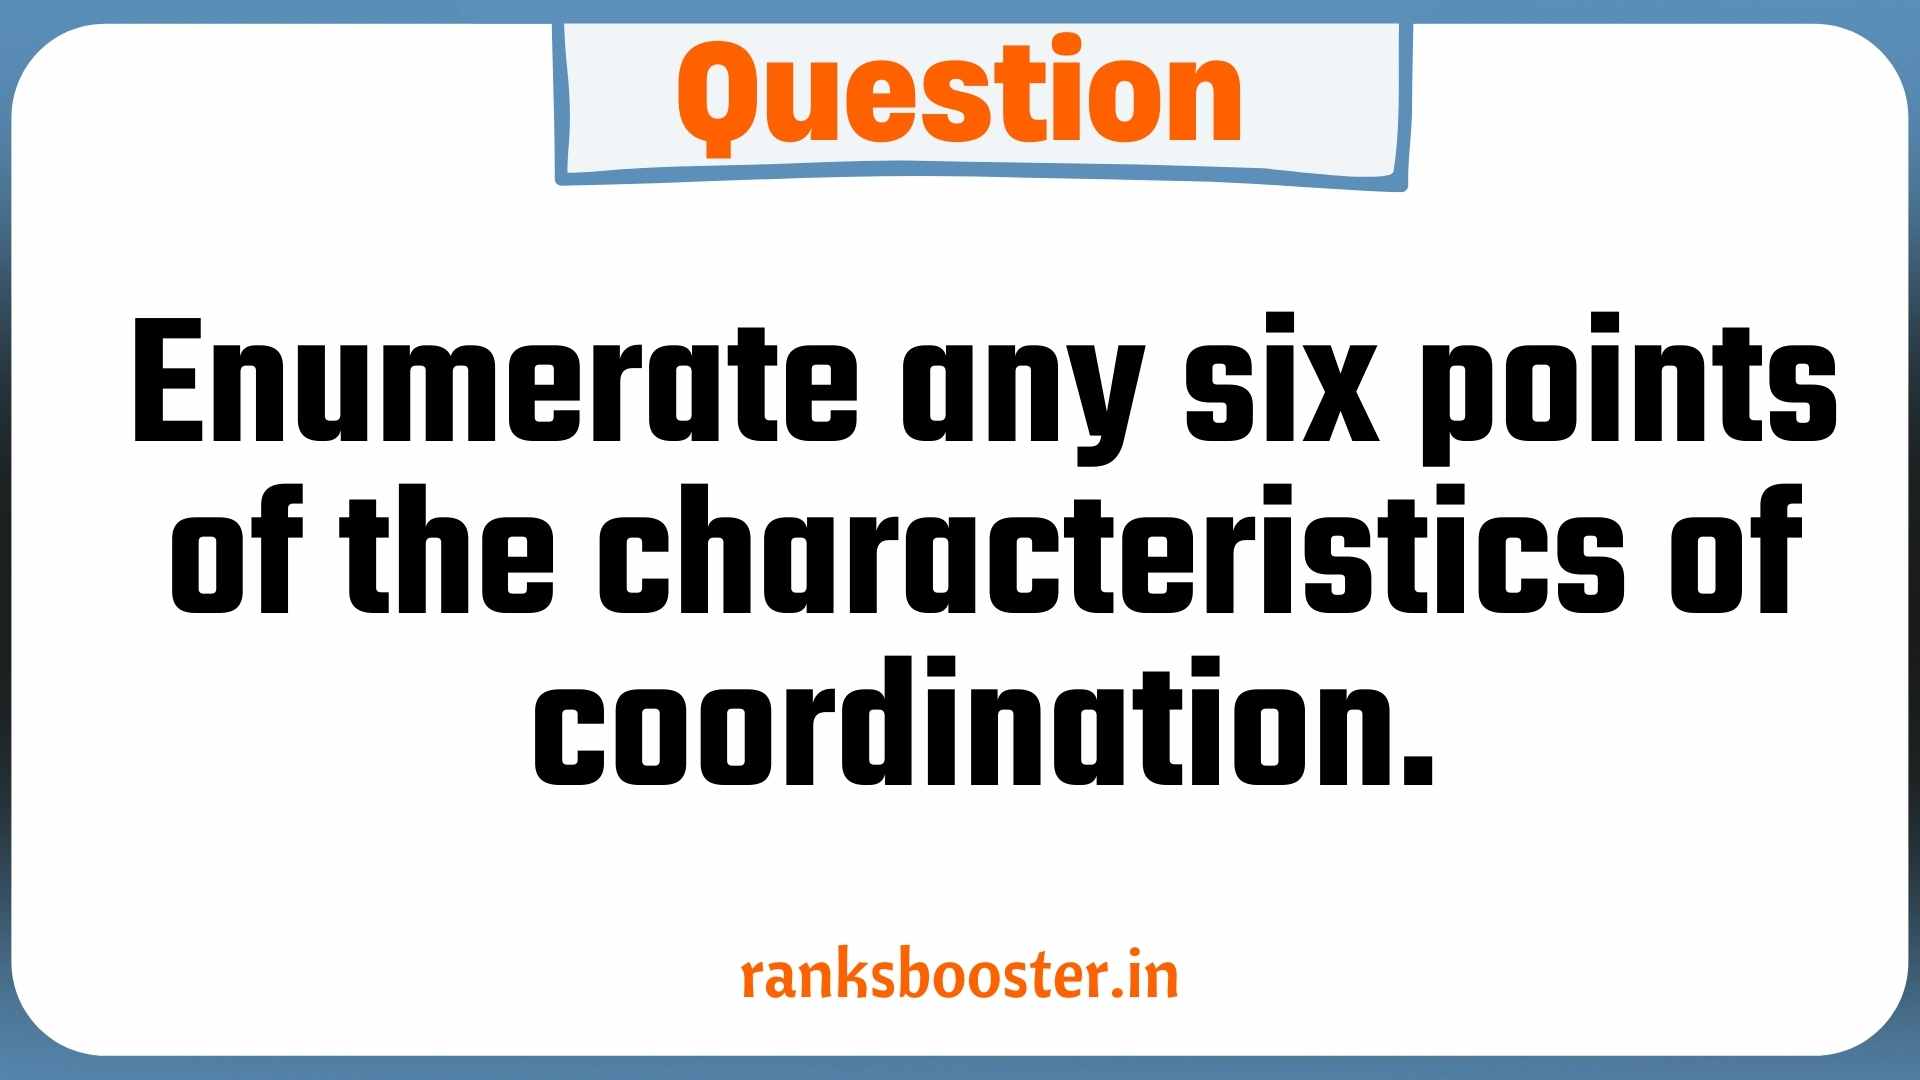 Question: Enumerate any six points of the characteristics of coordination